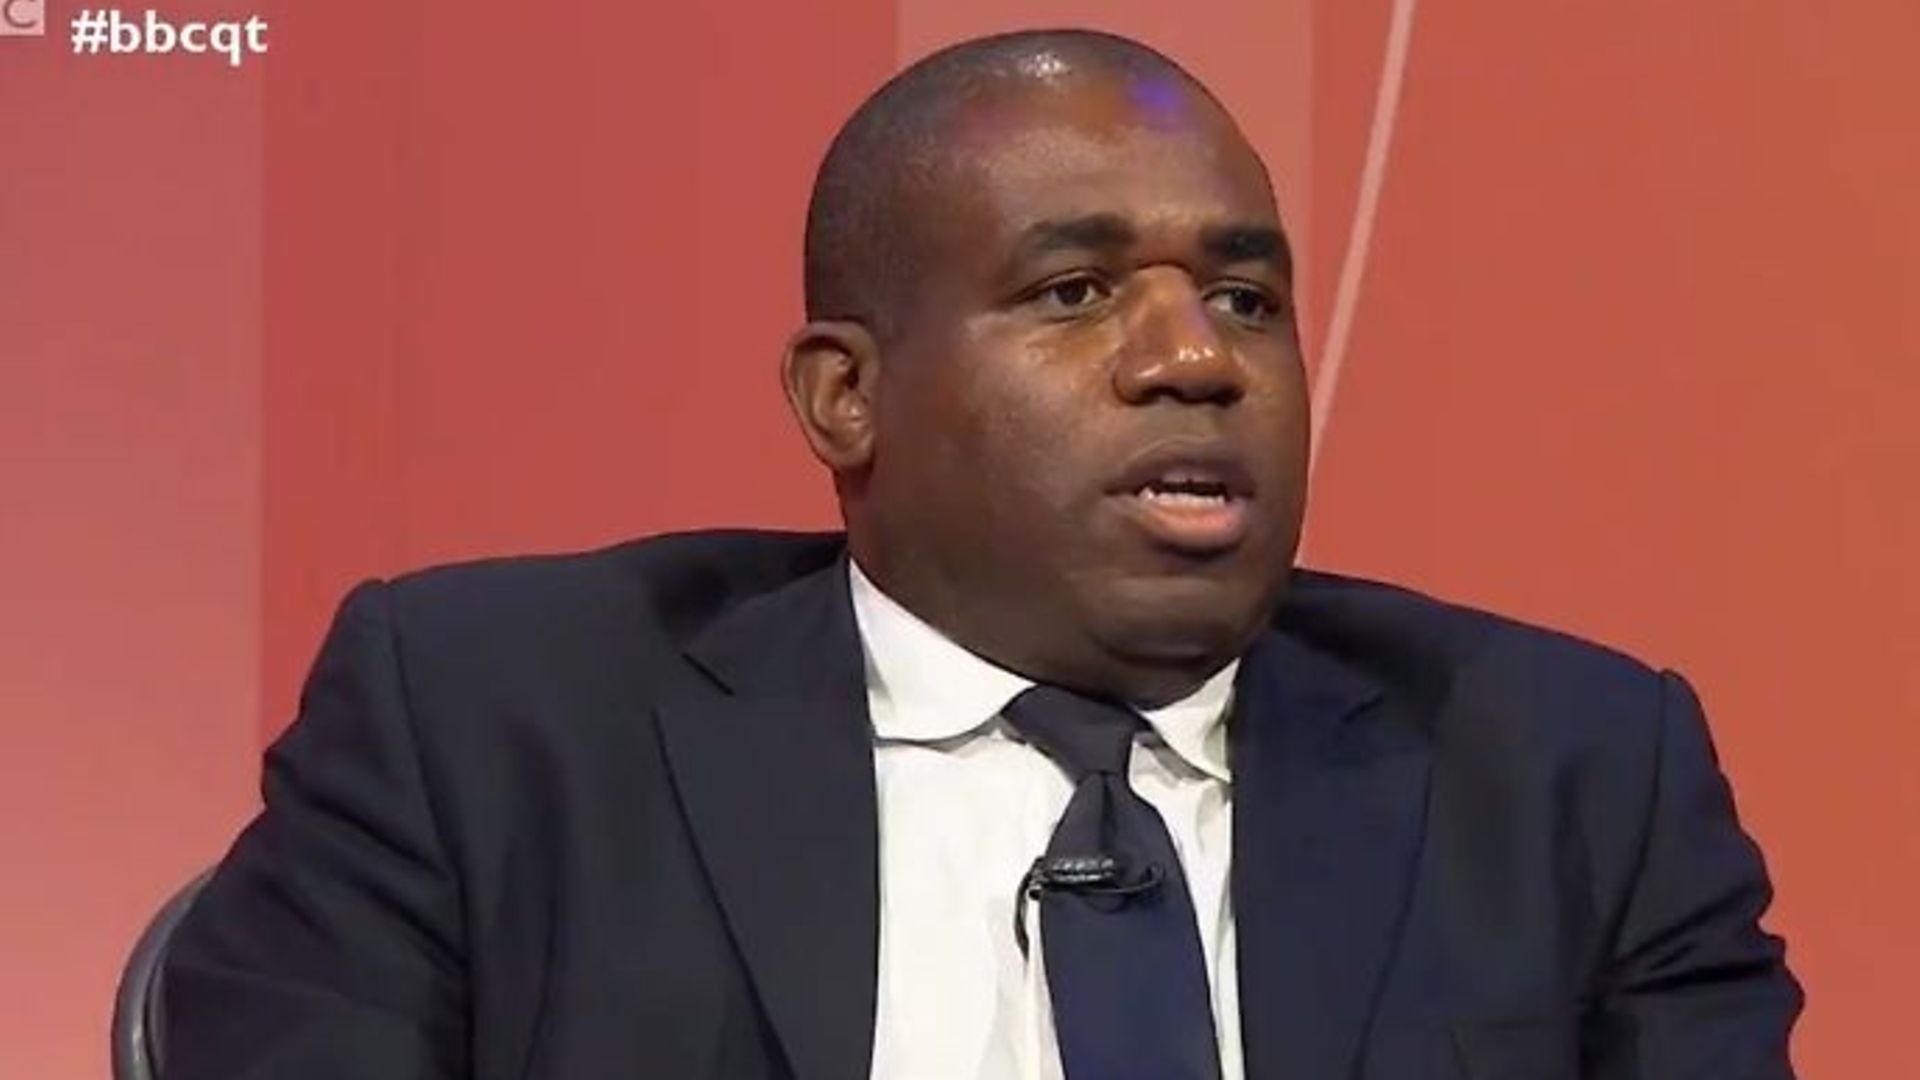 Shadow justice secretary David Lammy on the BBC's Question Time - Credit: Twitter